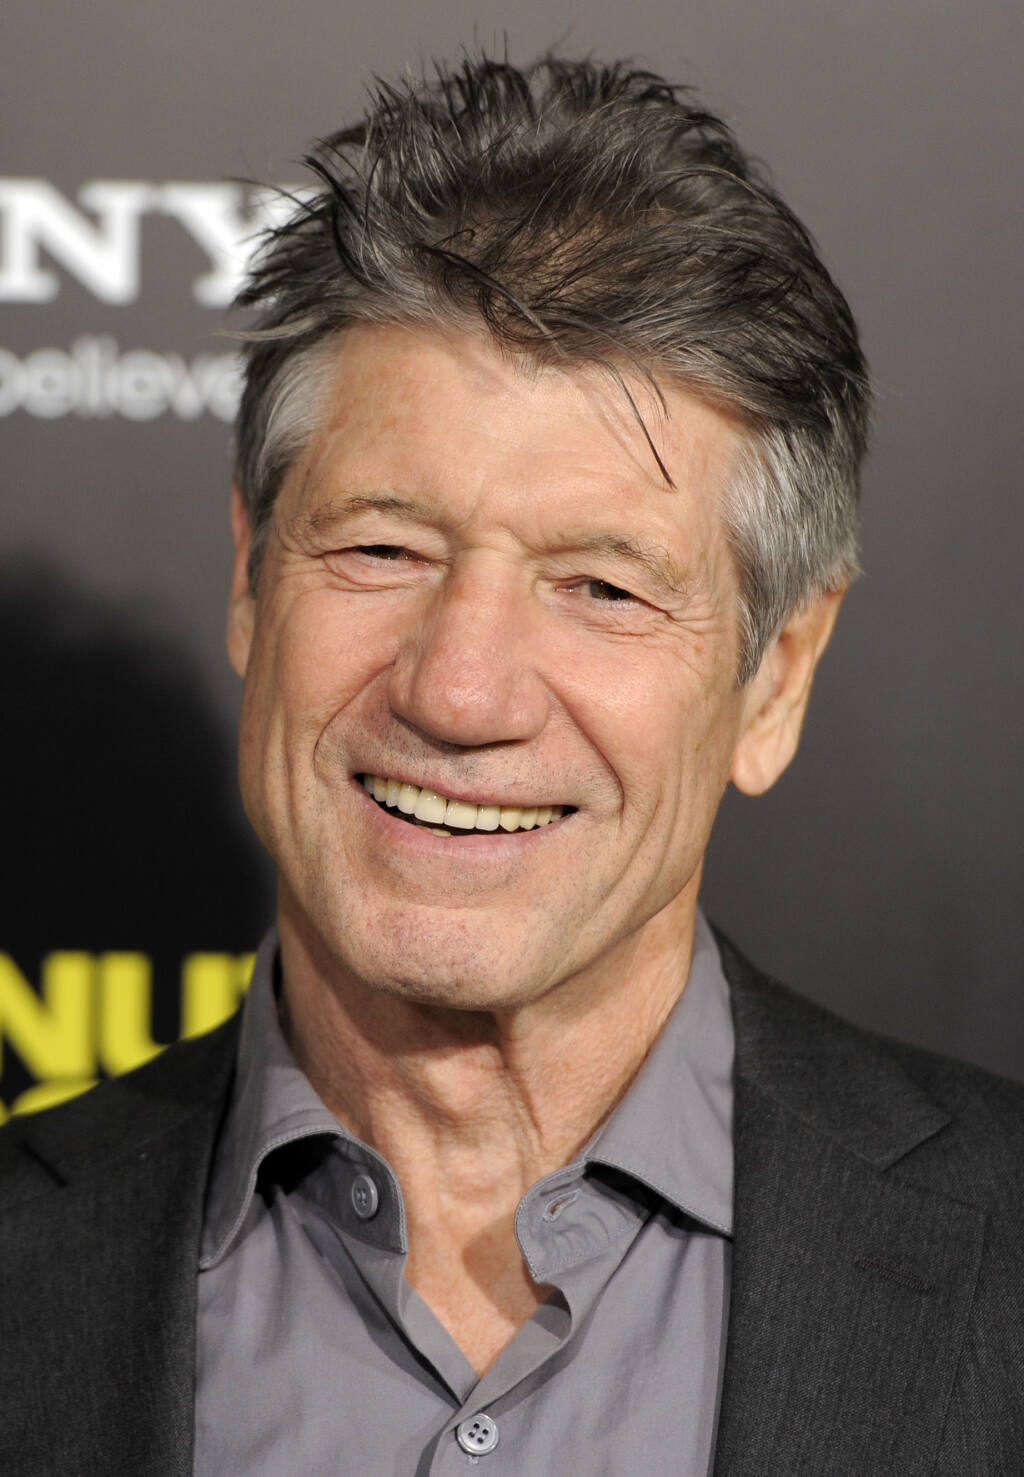 Fred Ward, of 'Tremors' and 'The Right Stuff,' dies at 79